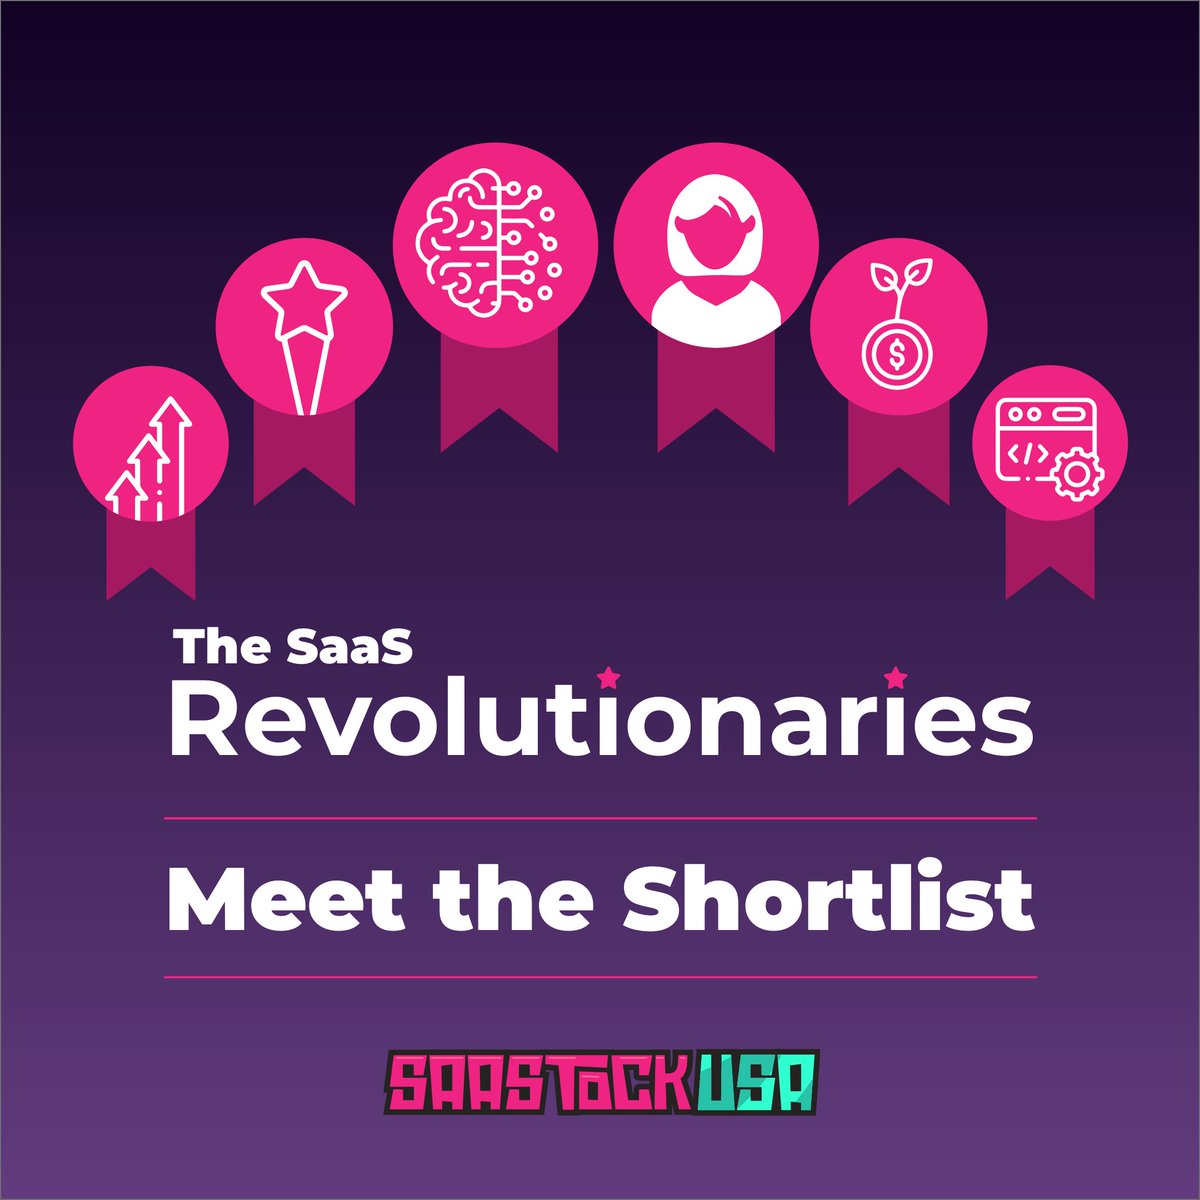 This year’s #SaaStockUSA will see the inaugural #SaaSRevolutionaries: a set of awards designed to champion the North American companies disrupting the SaaS space. We're thrilled to officially announce our shortlist! buff.ly/3Qr4ujg 👀 #SaaS #shortlist #growth #founder